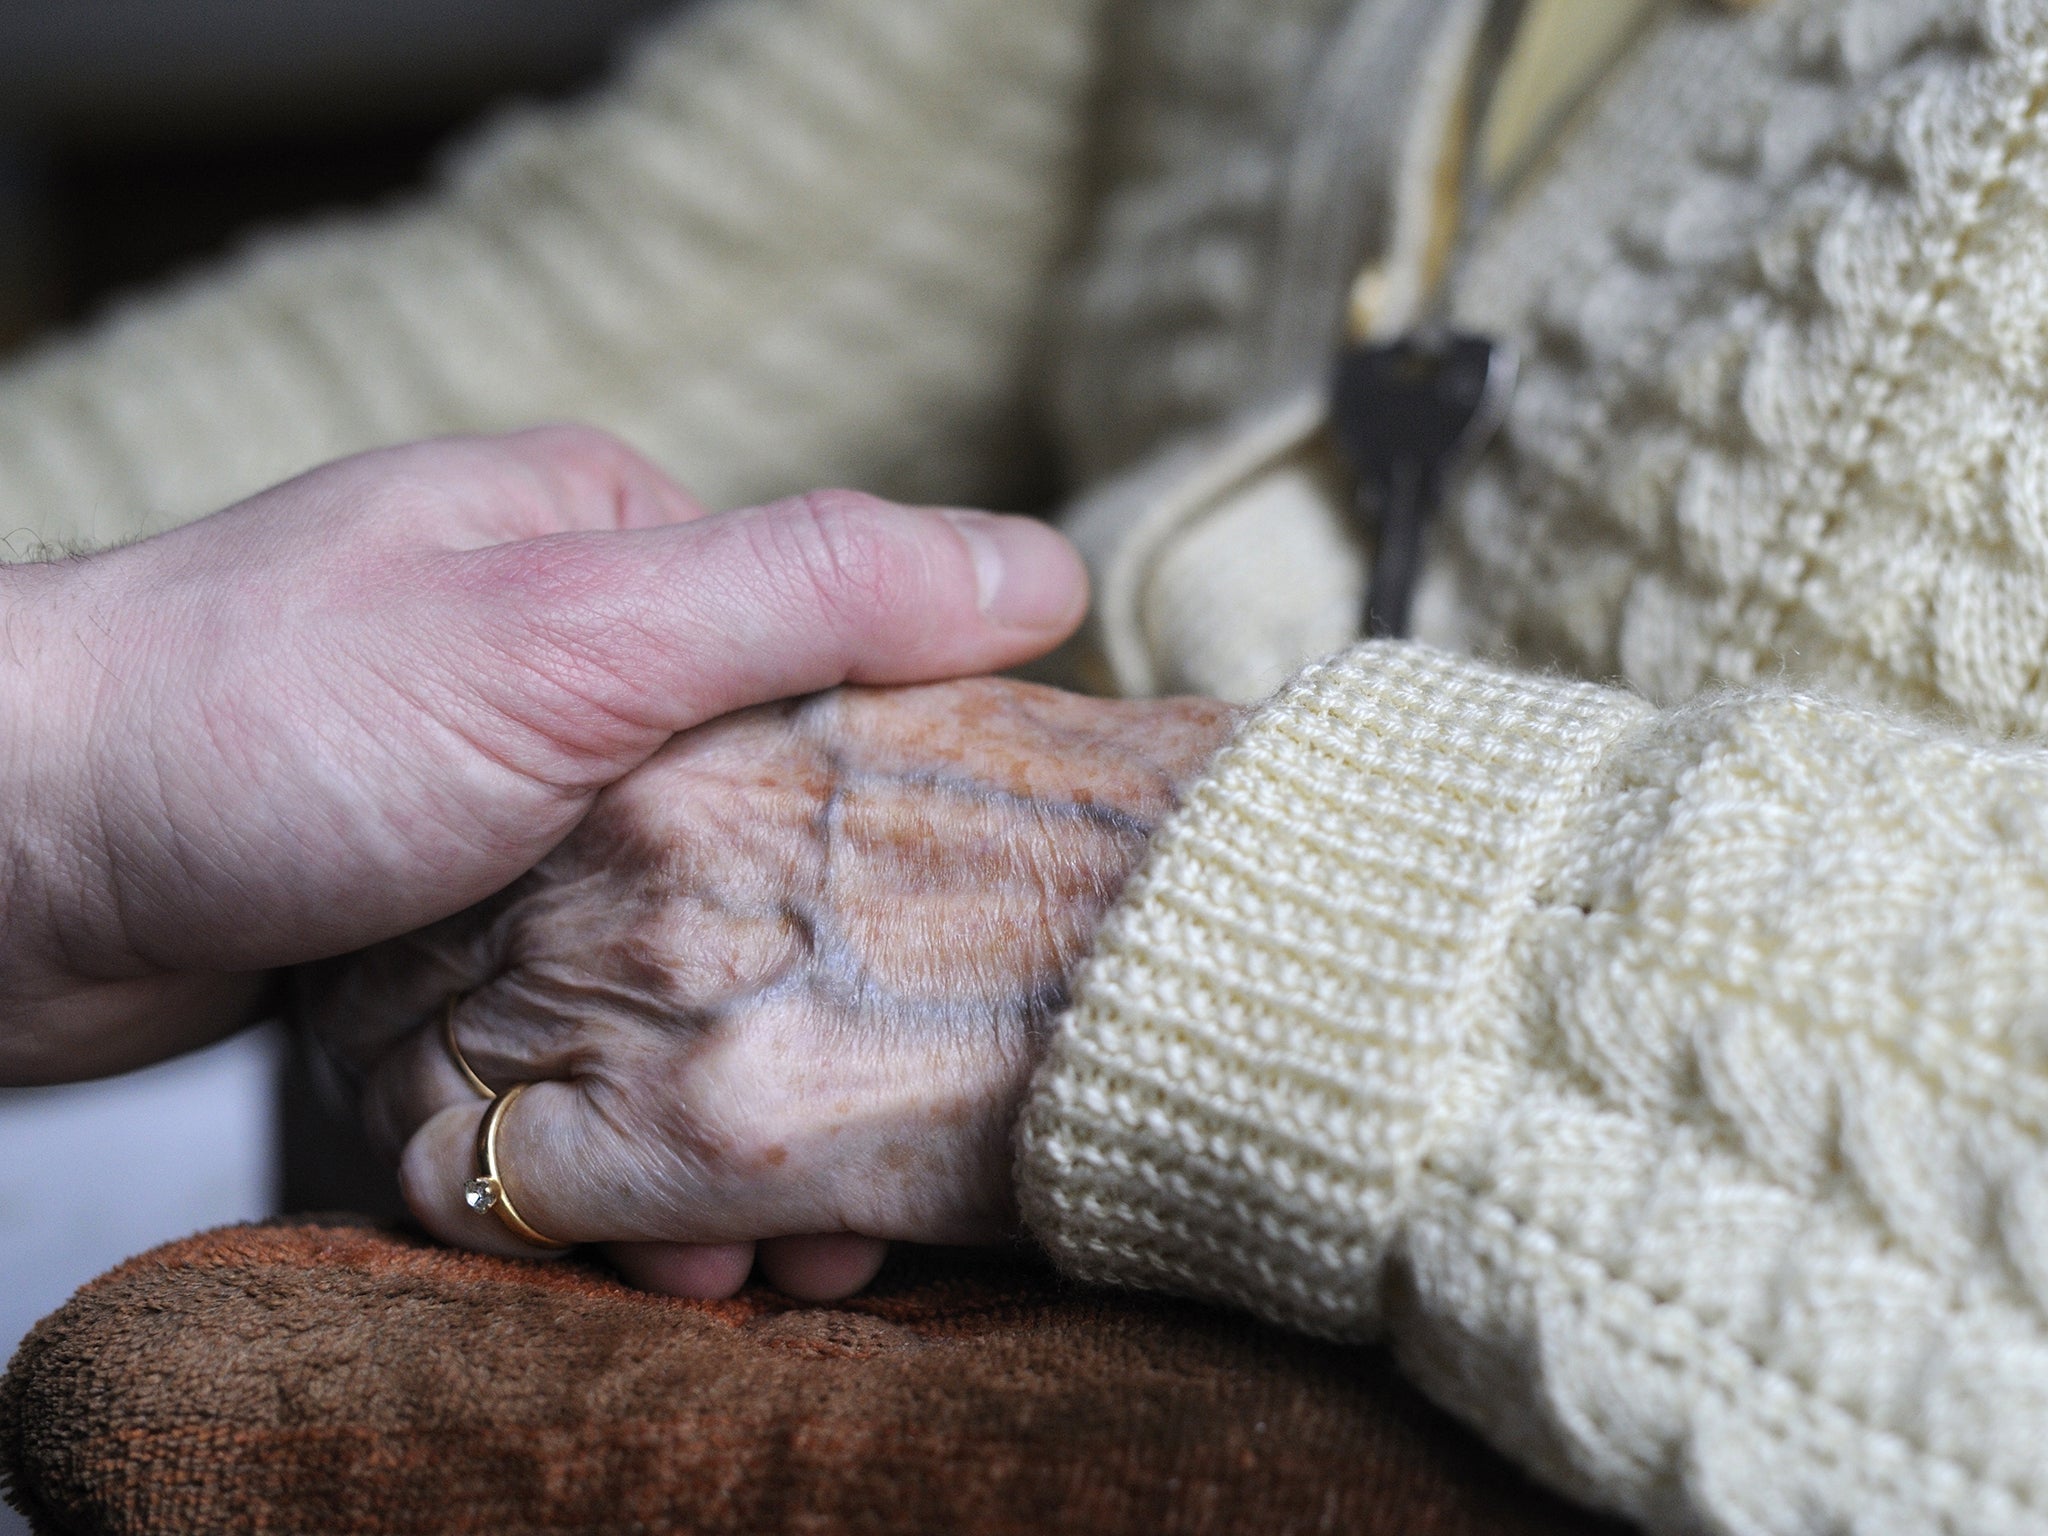 The last words of the dying to their loved ones are most often advice about relationships